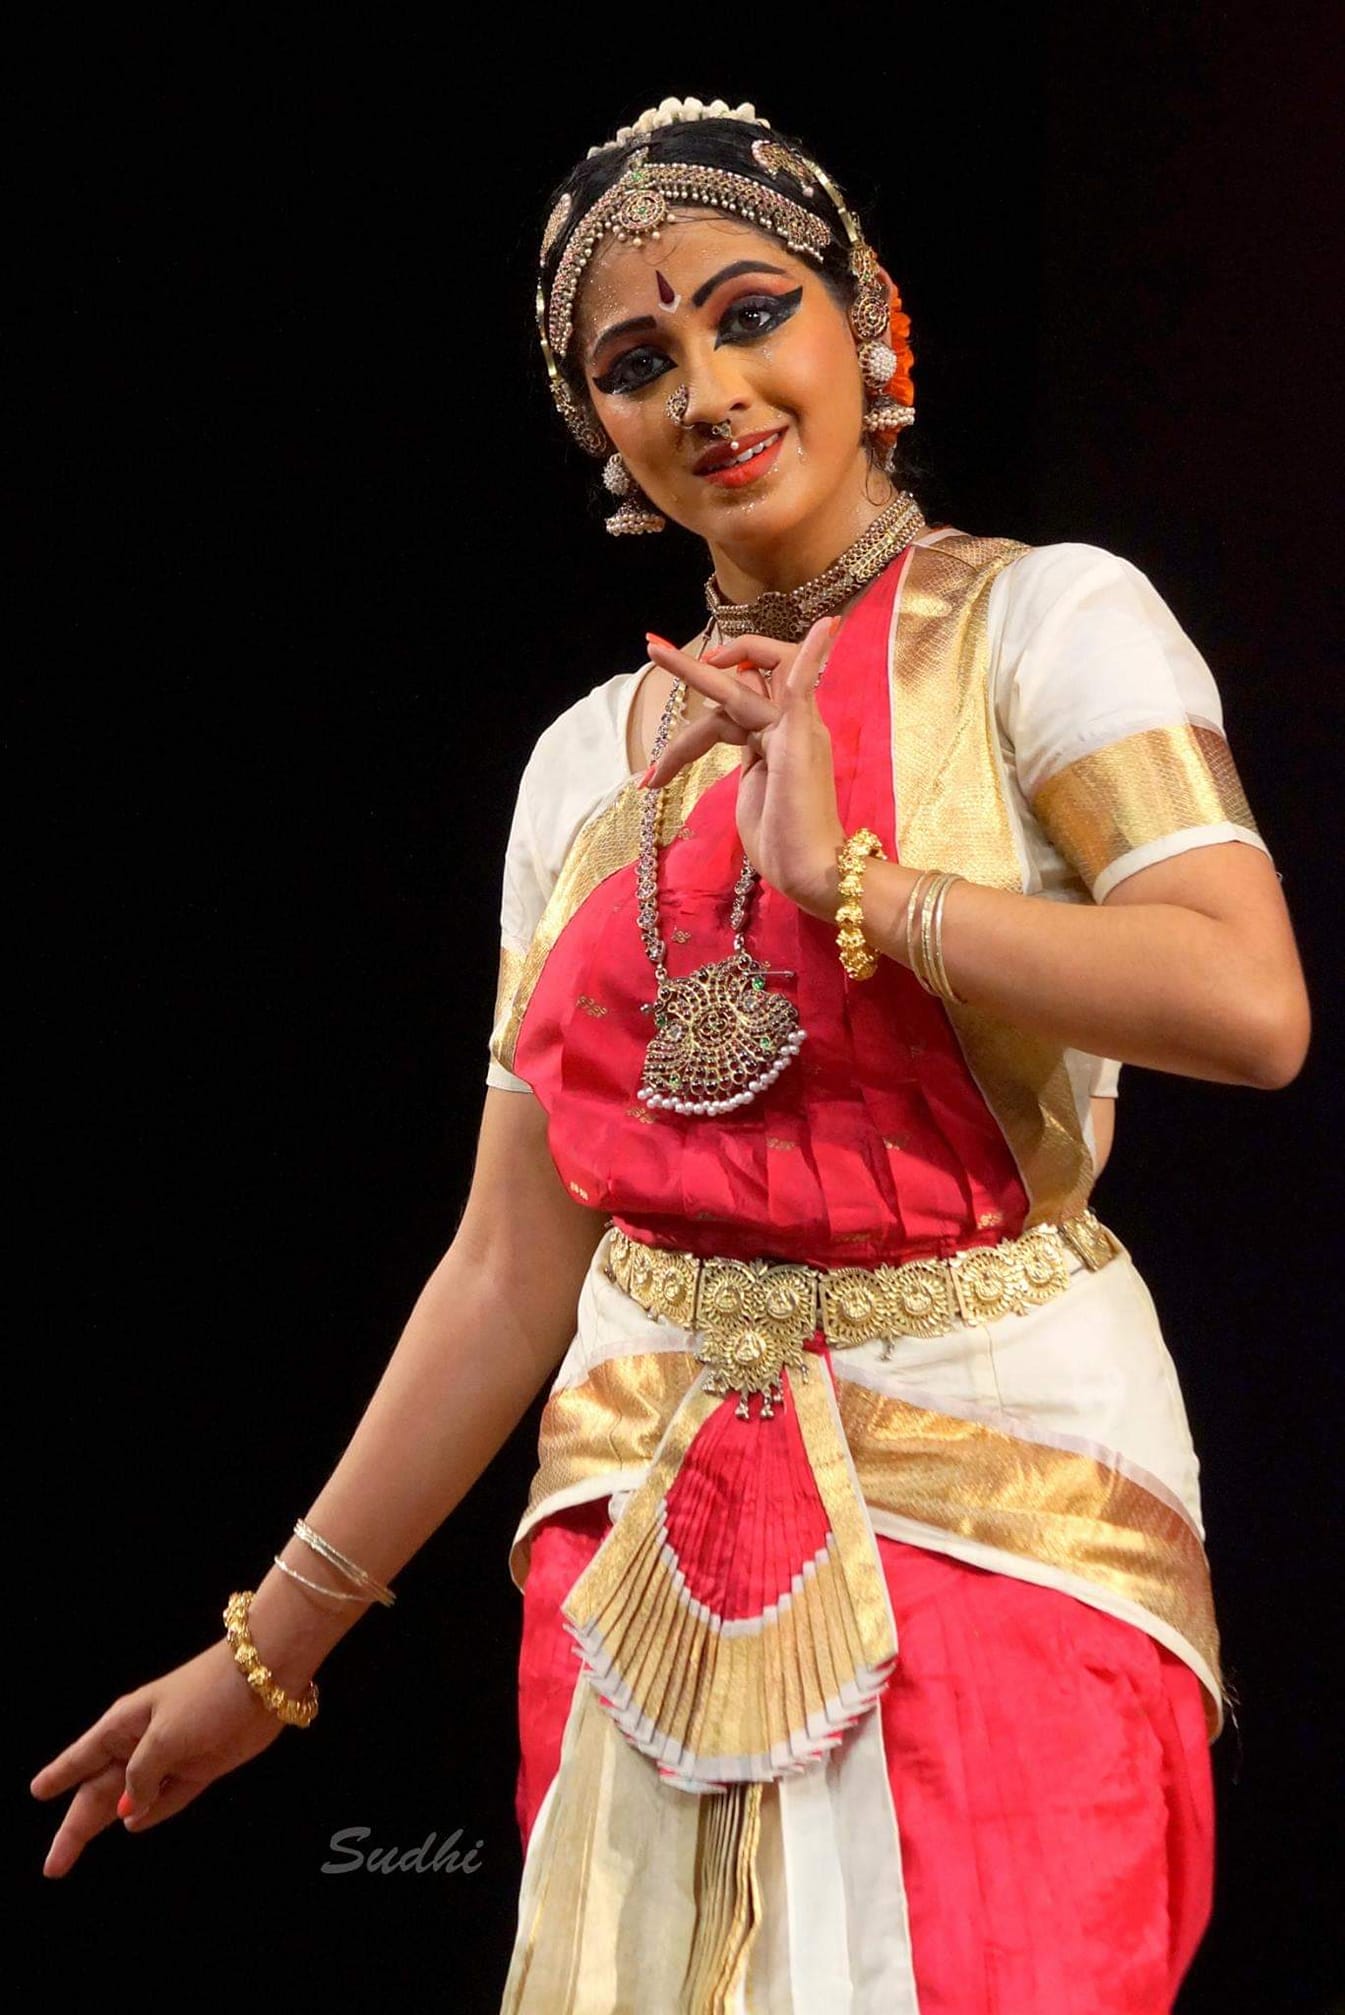 Winning Hearts With Performing Arts – THE DANCE INDIA